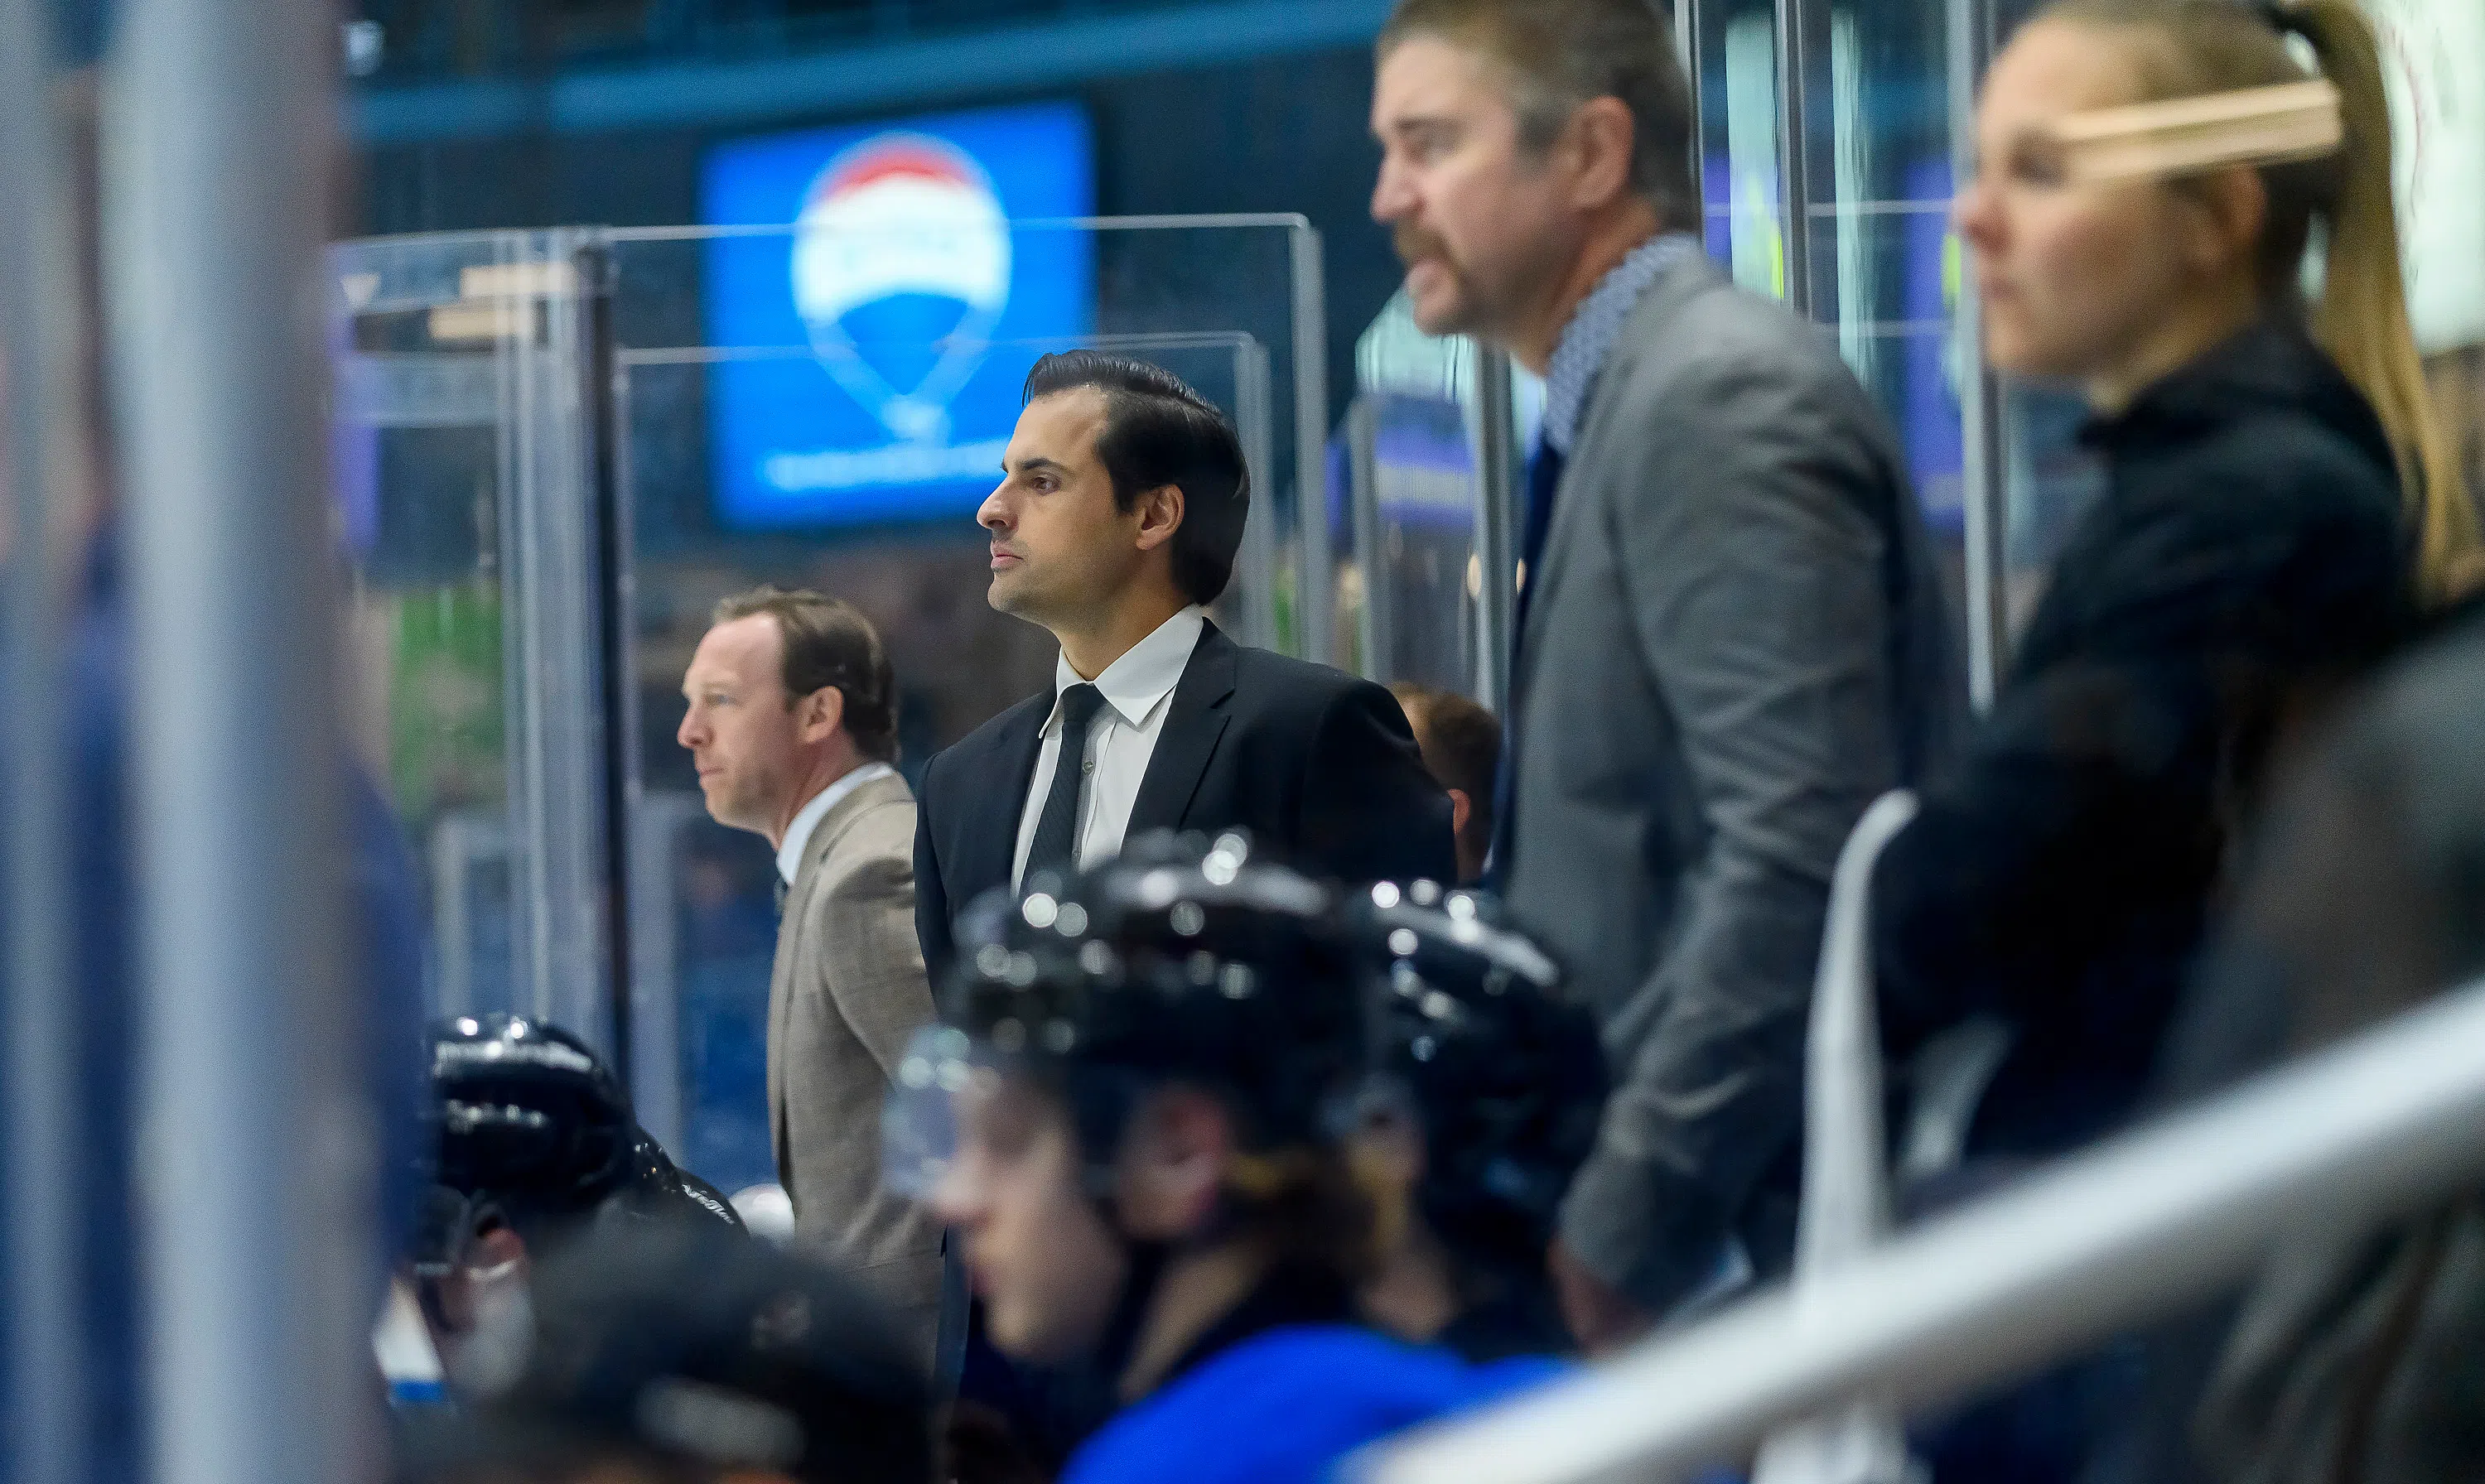 Sea Dogs coach excited for playoffs